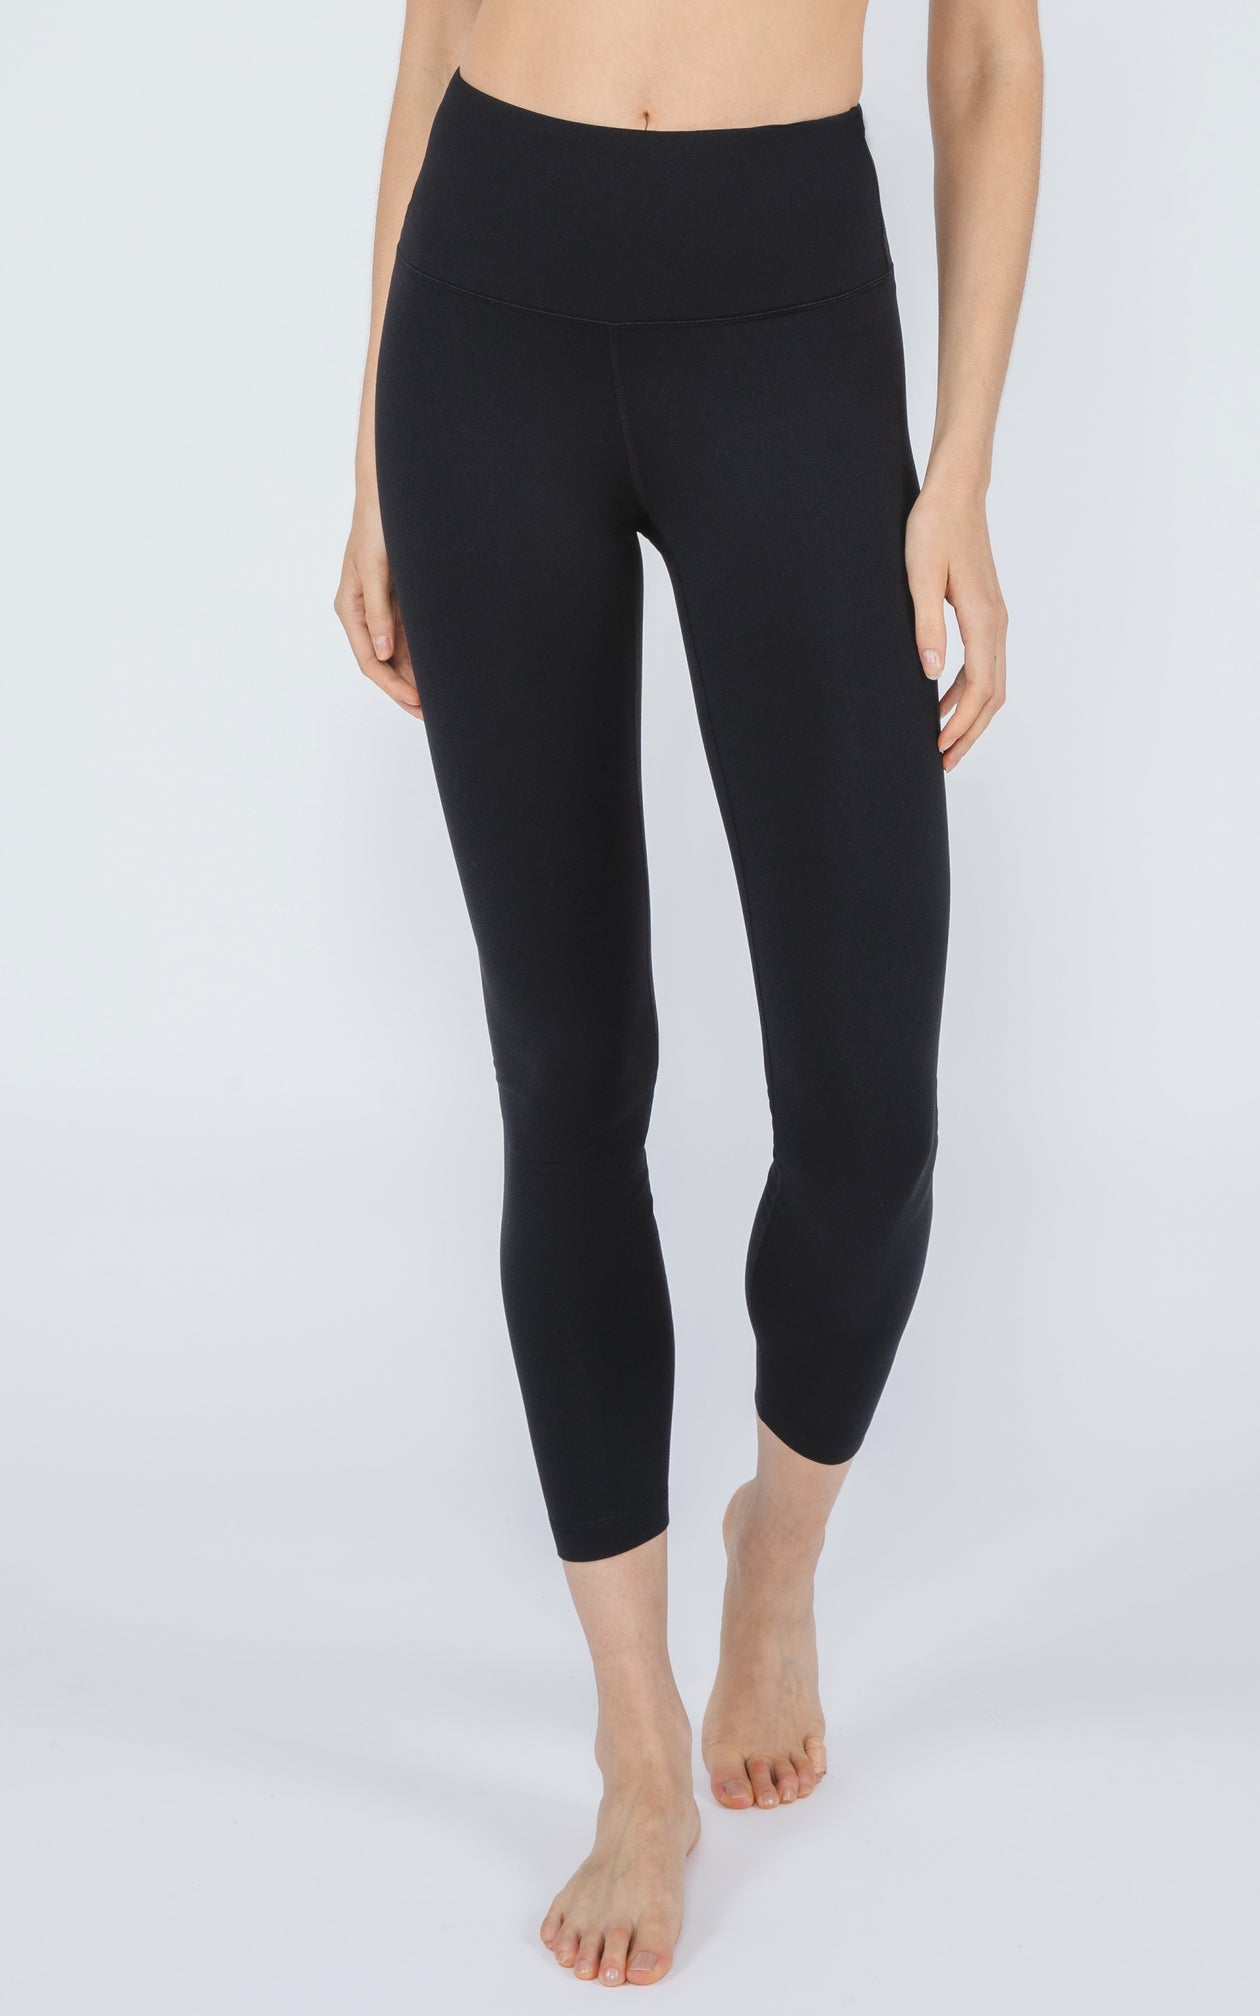 Women's High Waisted Everyday Active 7/8 Leggings - A New Day